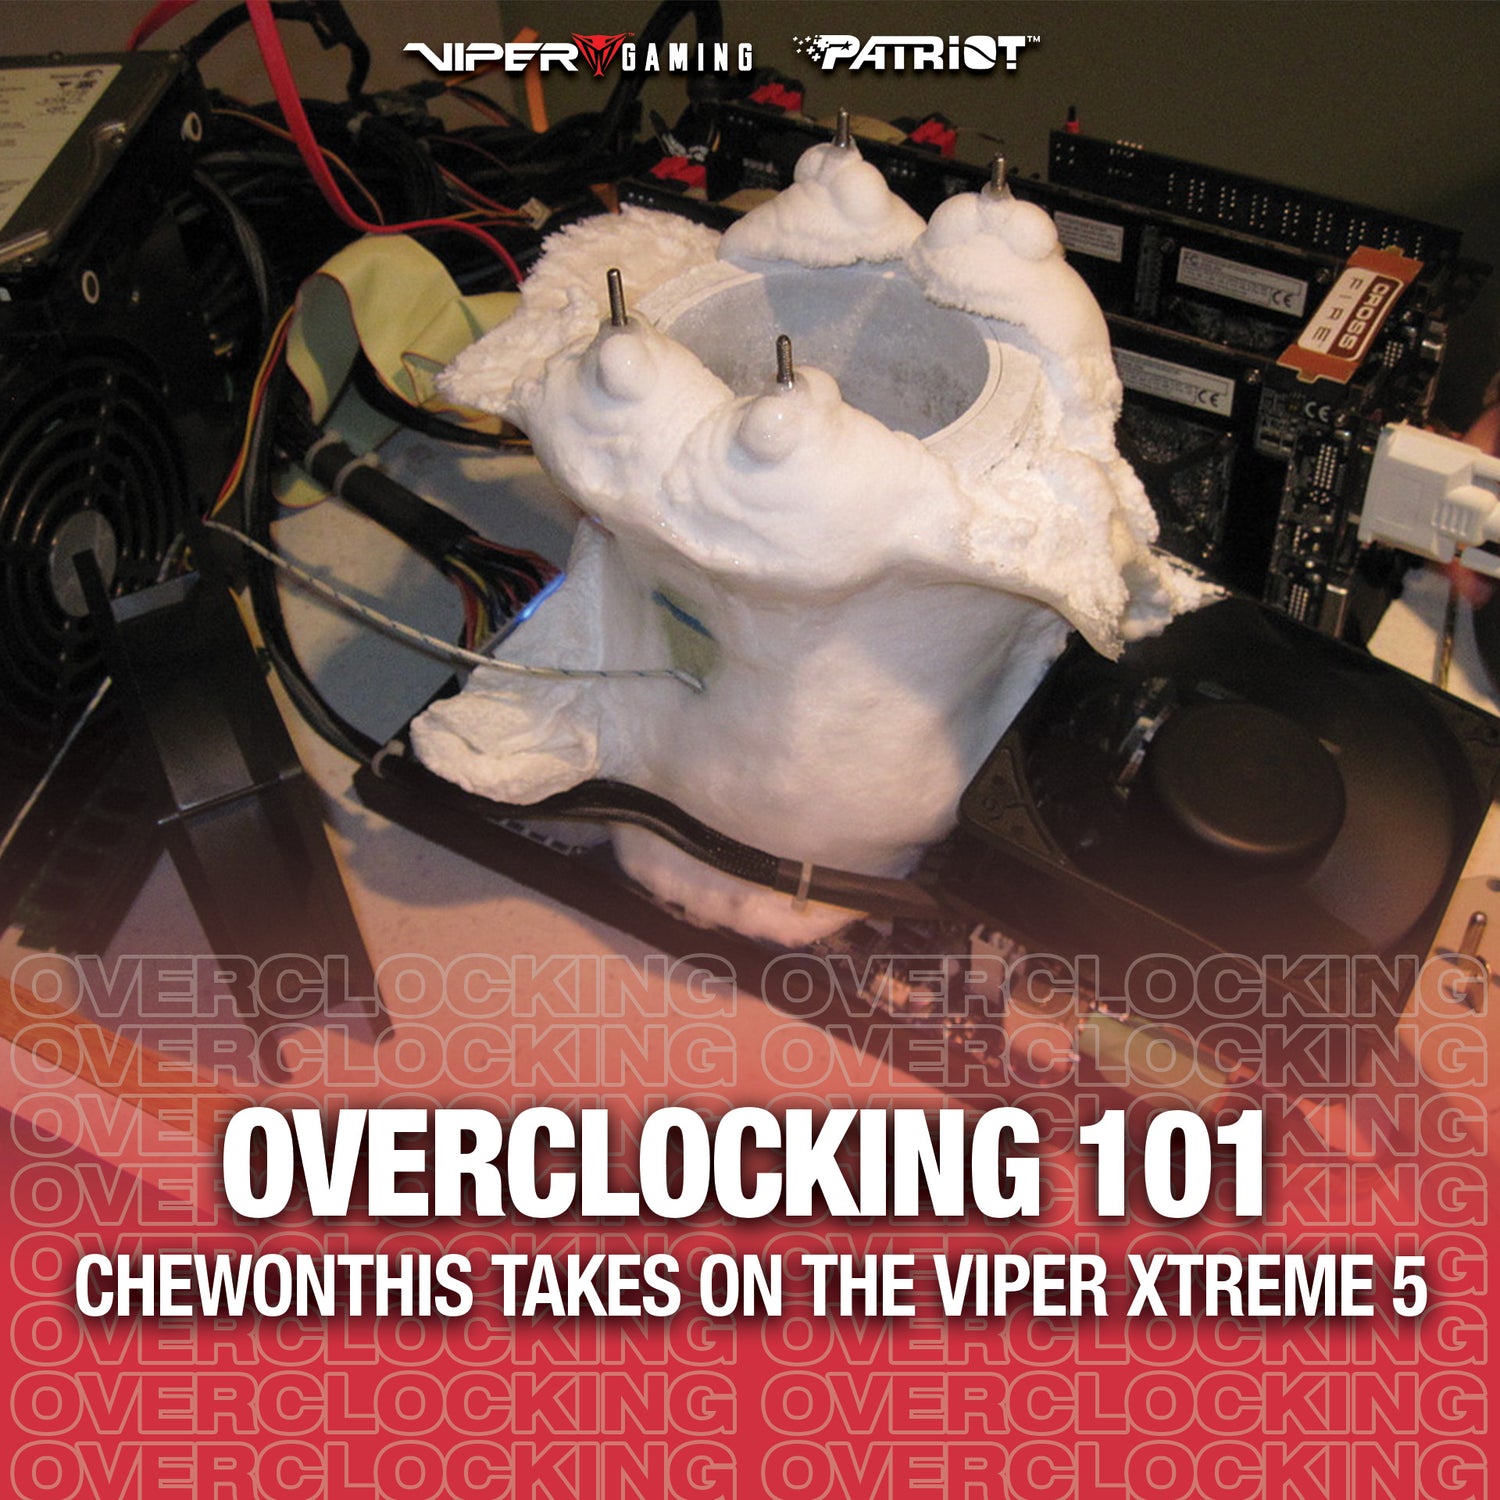 Overclocking 101: Chewonthis Takes on the Viper Xtreme 5